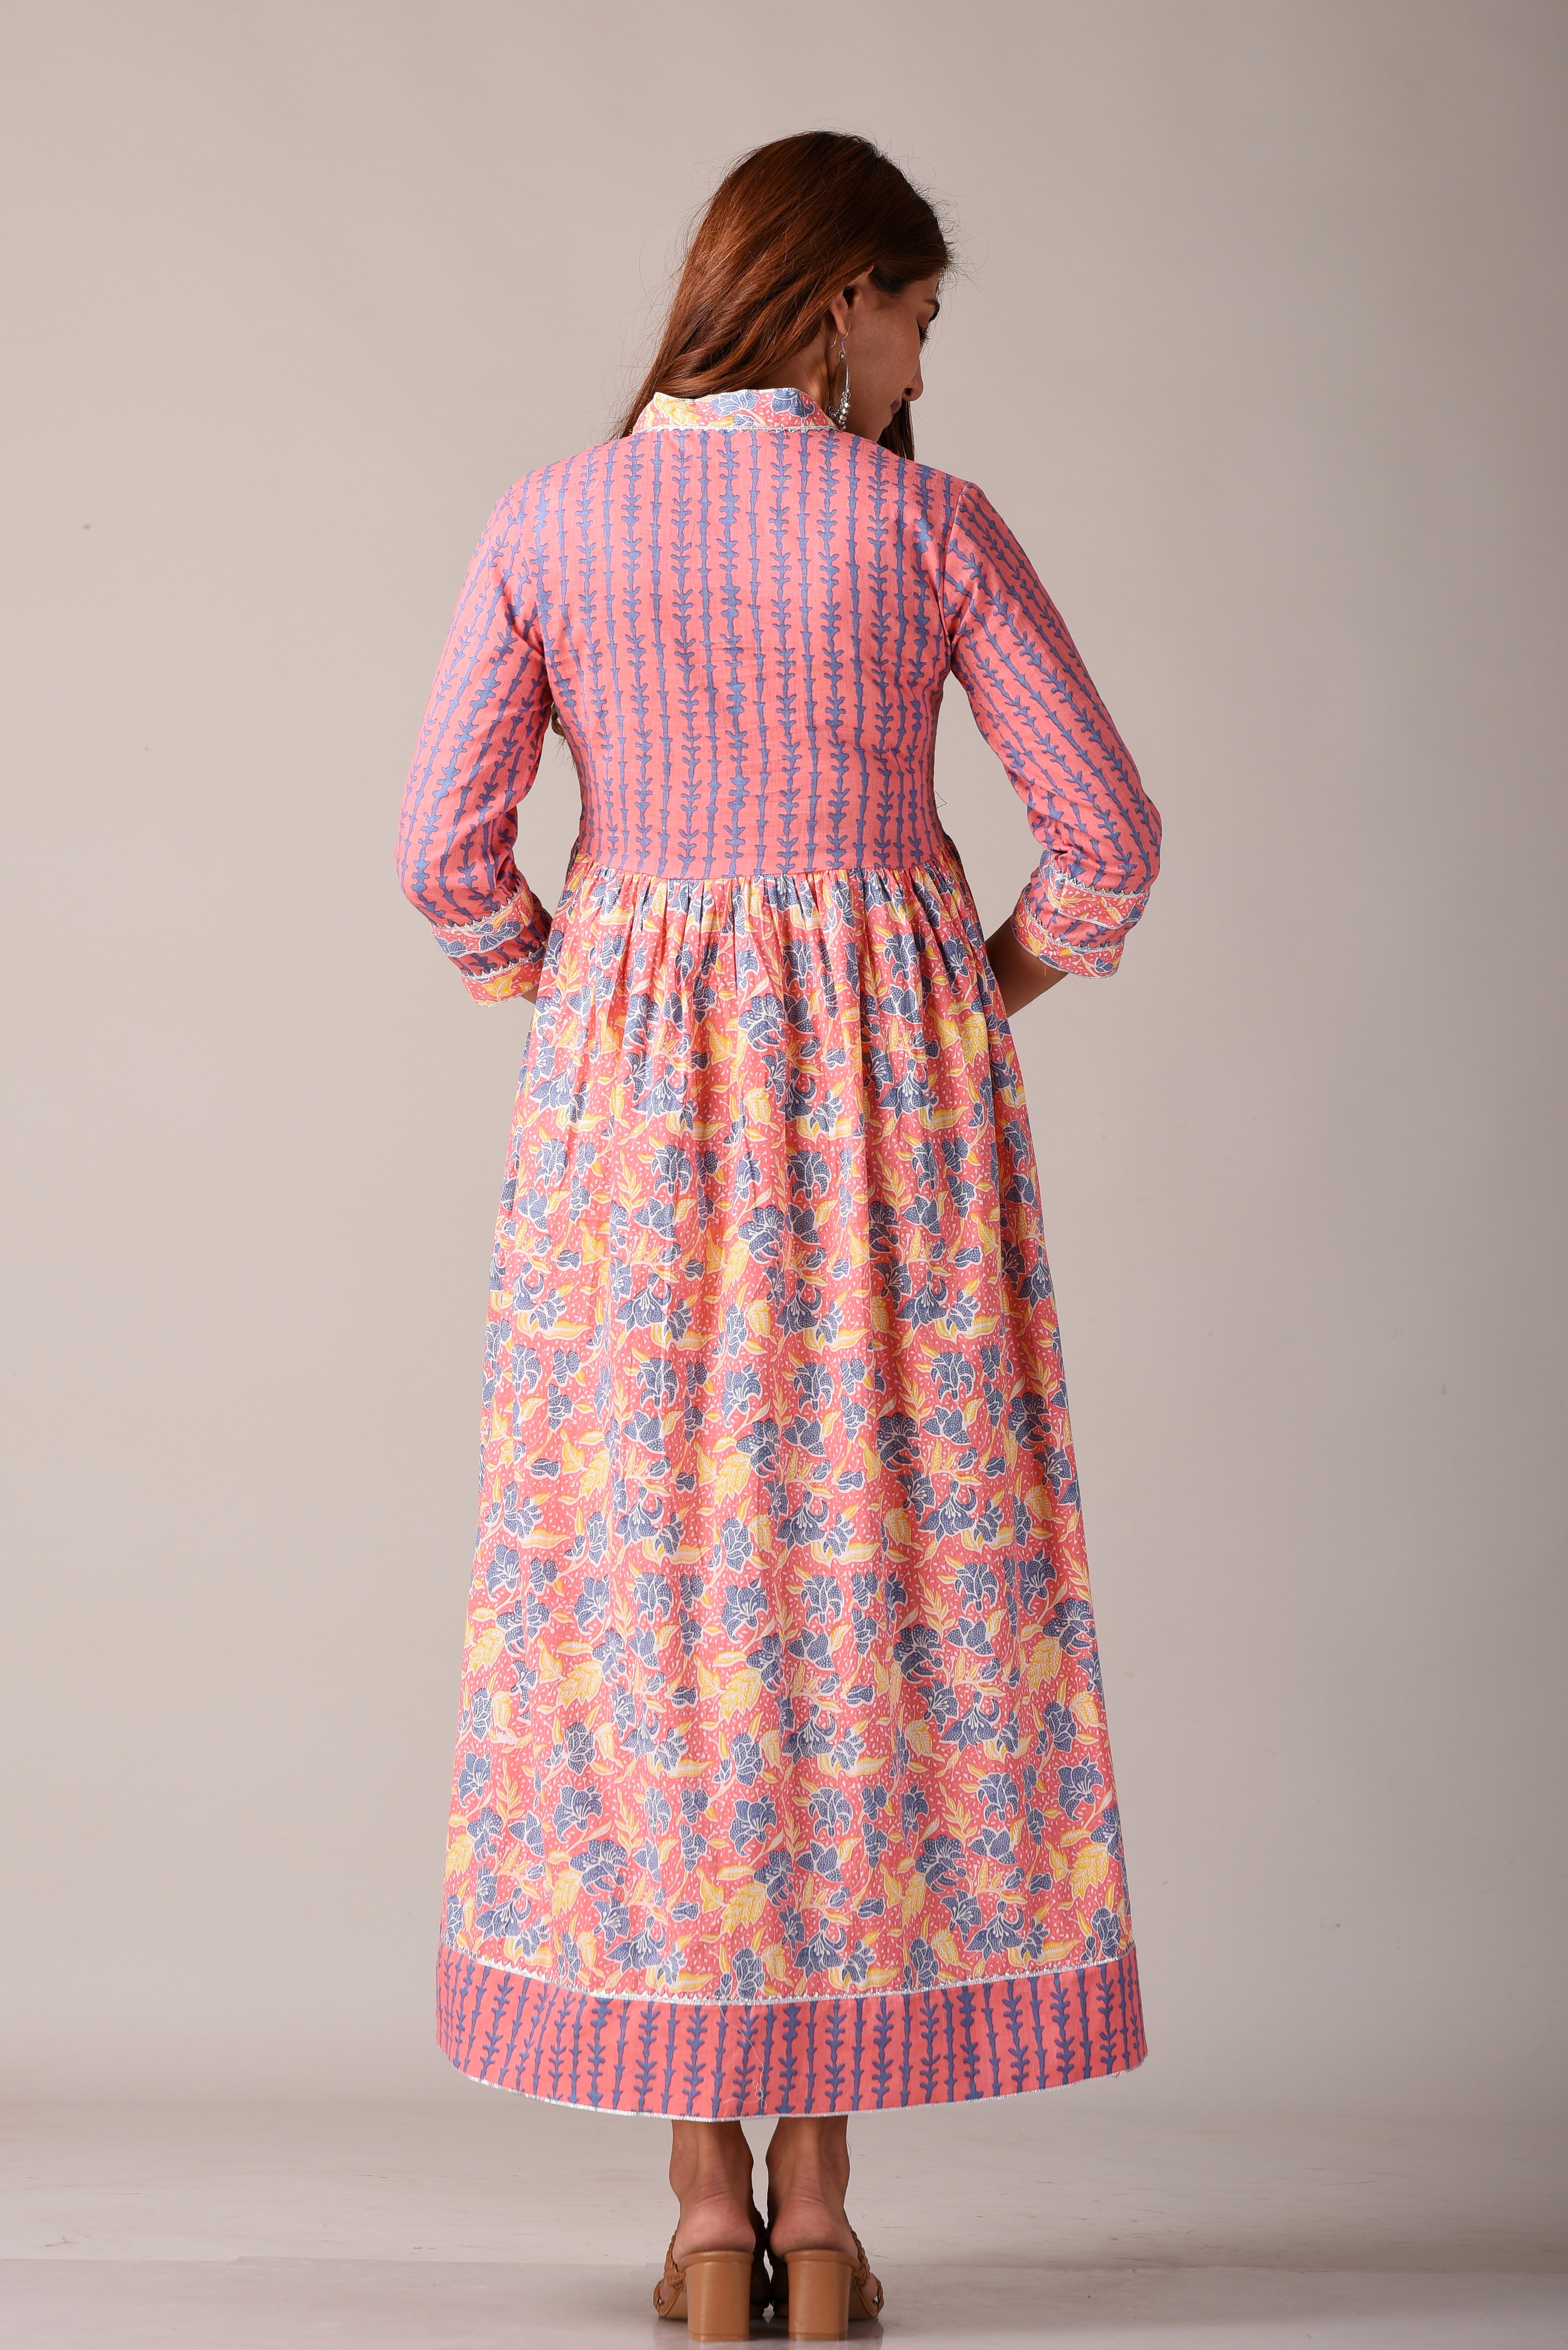 Floral Pink Printed Pure Cotton Maxi Dress